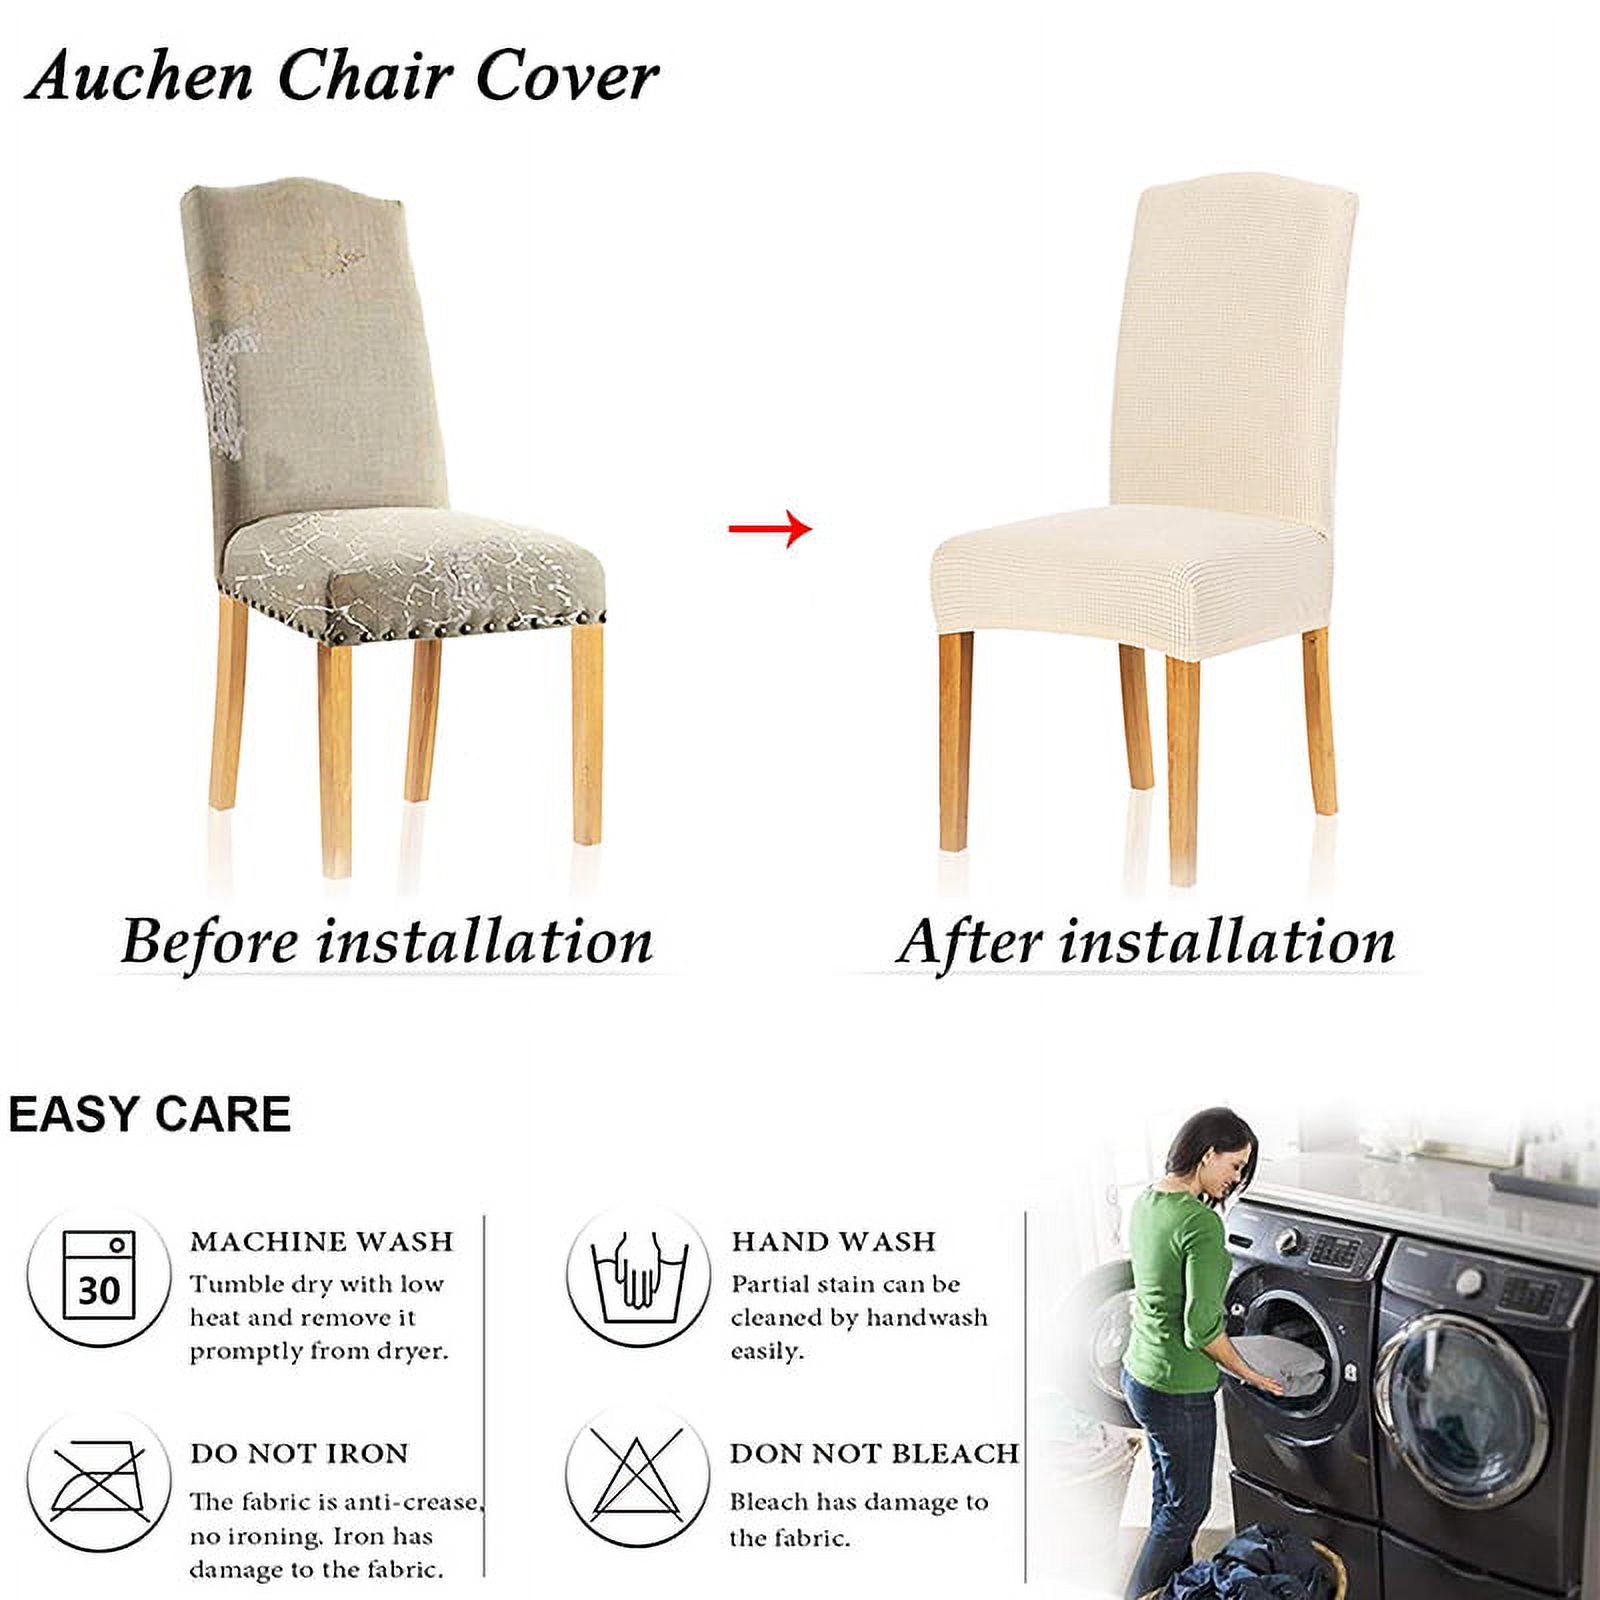 Chair Slipcover, AUCHEN Super Stretchy Dining Chair Covers Set of 2, Parsons Chair Protector Covers Chair Covers for Dining Room, Furniture Protector Covers for Restaurant Hotel Ceremony (Beige) - image 3 of 9